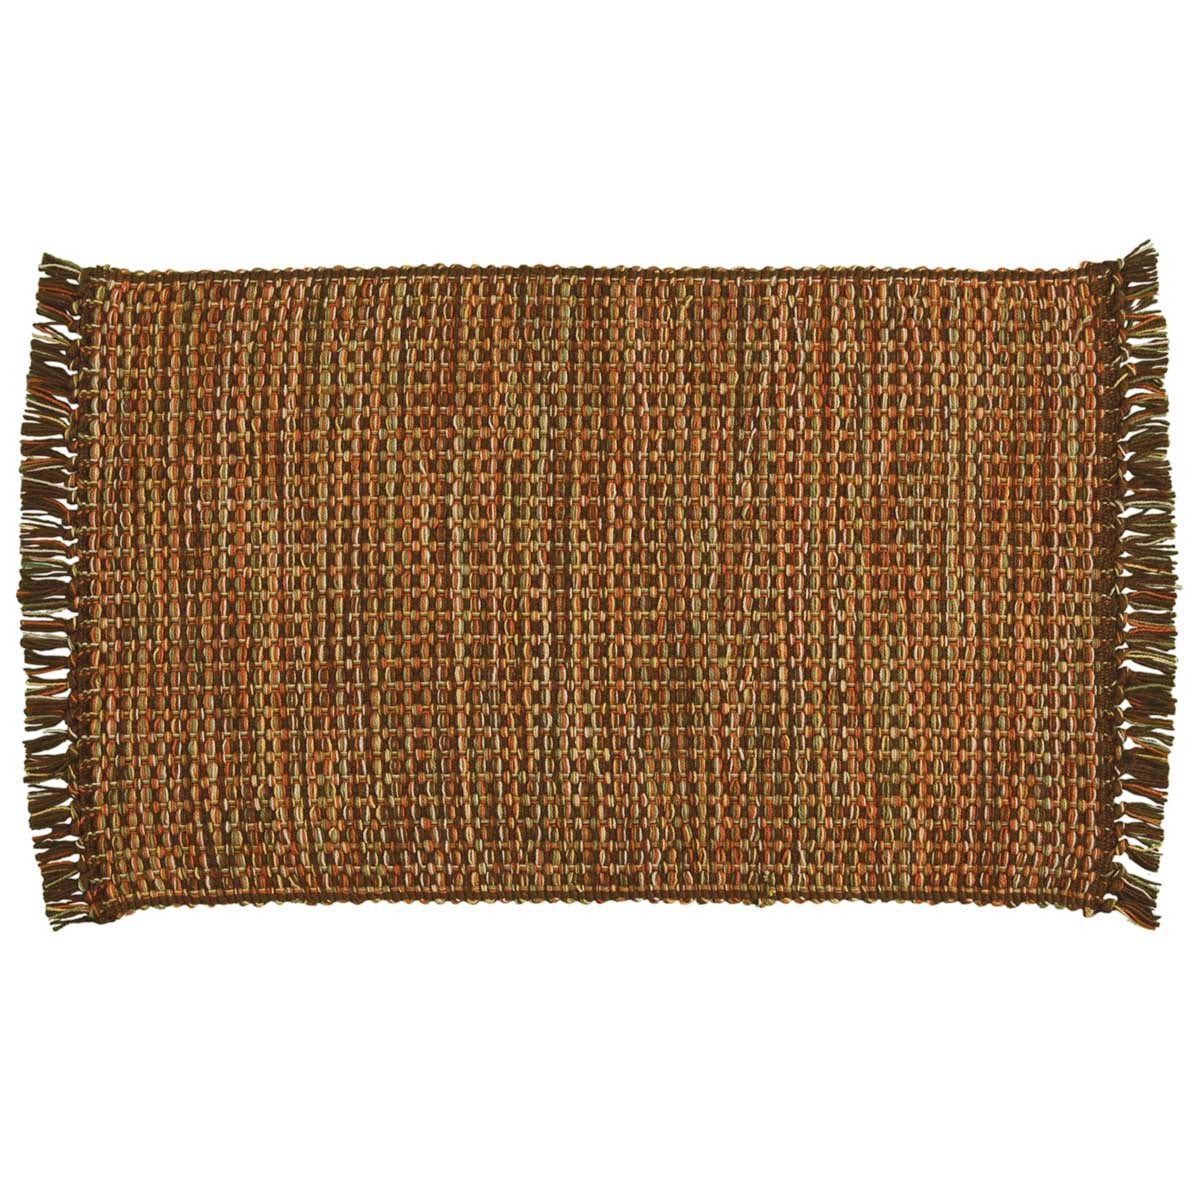 Harvest Tweed Woven Placemat